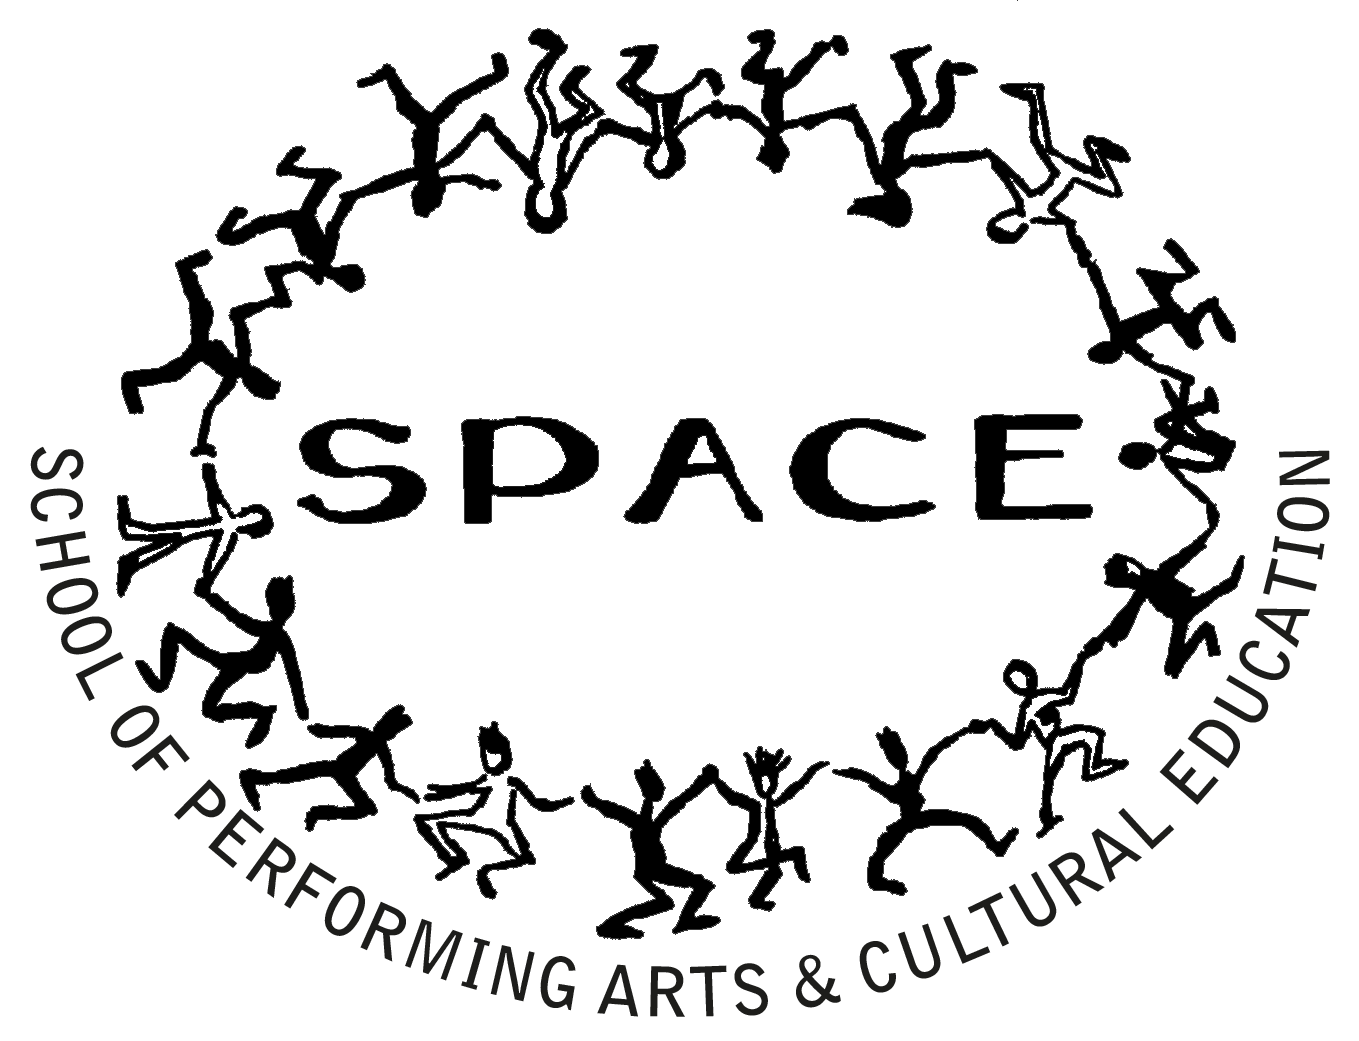 SPACE School of Performing Arts & Cultural Education